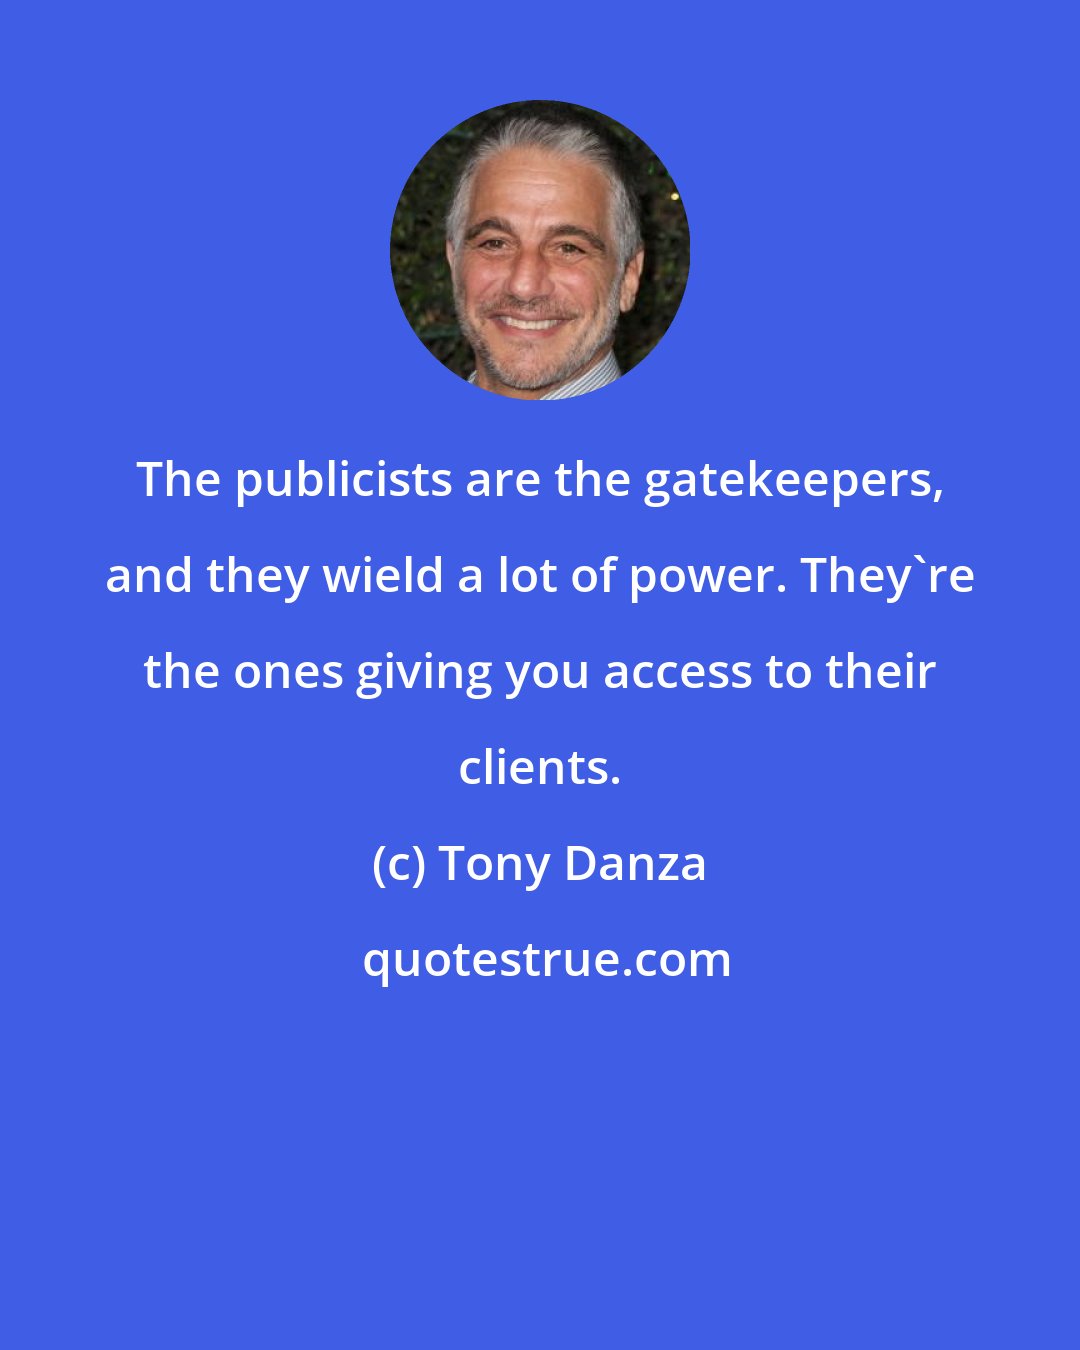 Tony Danza: The publicists are the gatekeepers, and they wield a lot of power. They're the ones giving you access to their clients.